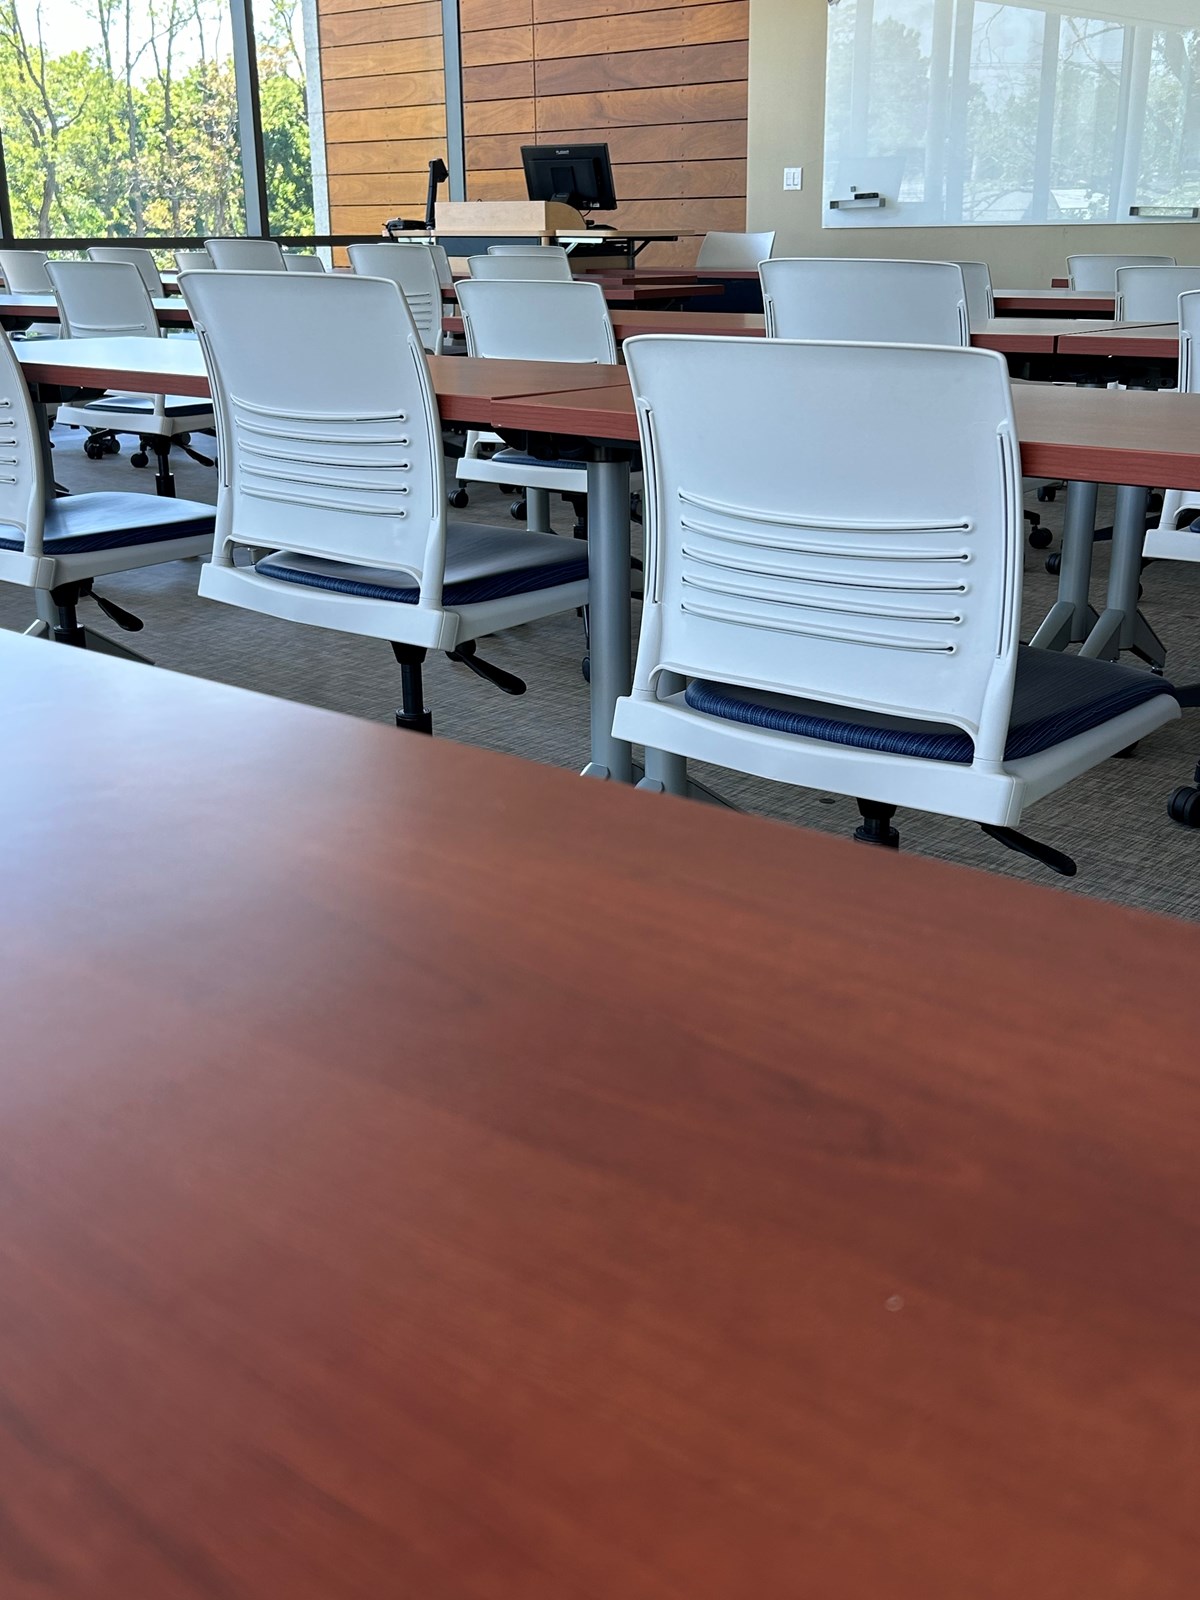 tables and chairs in a modern classroom